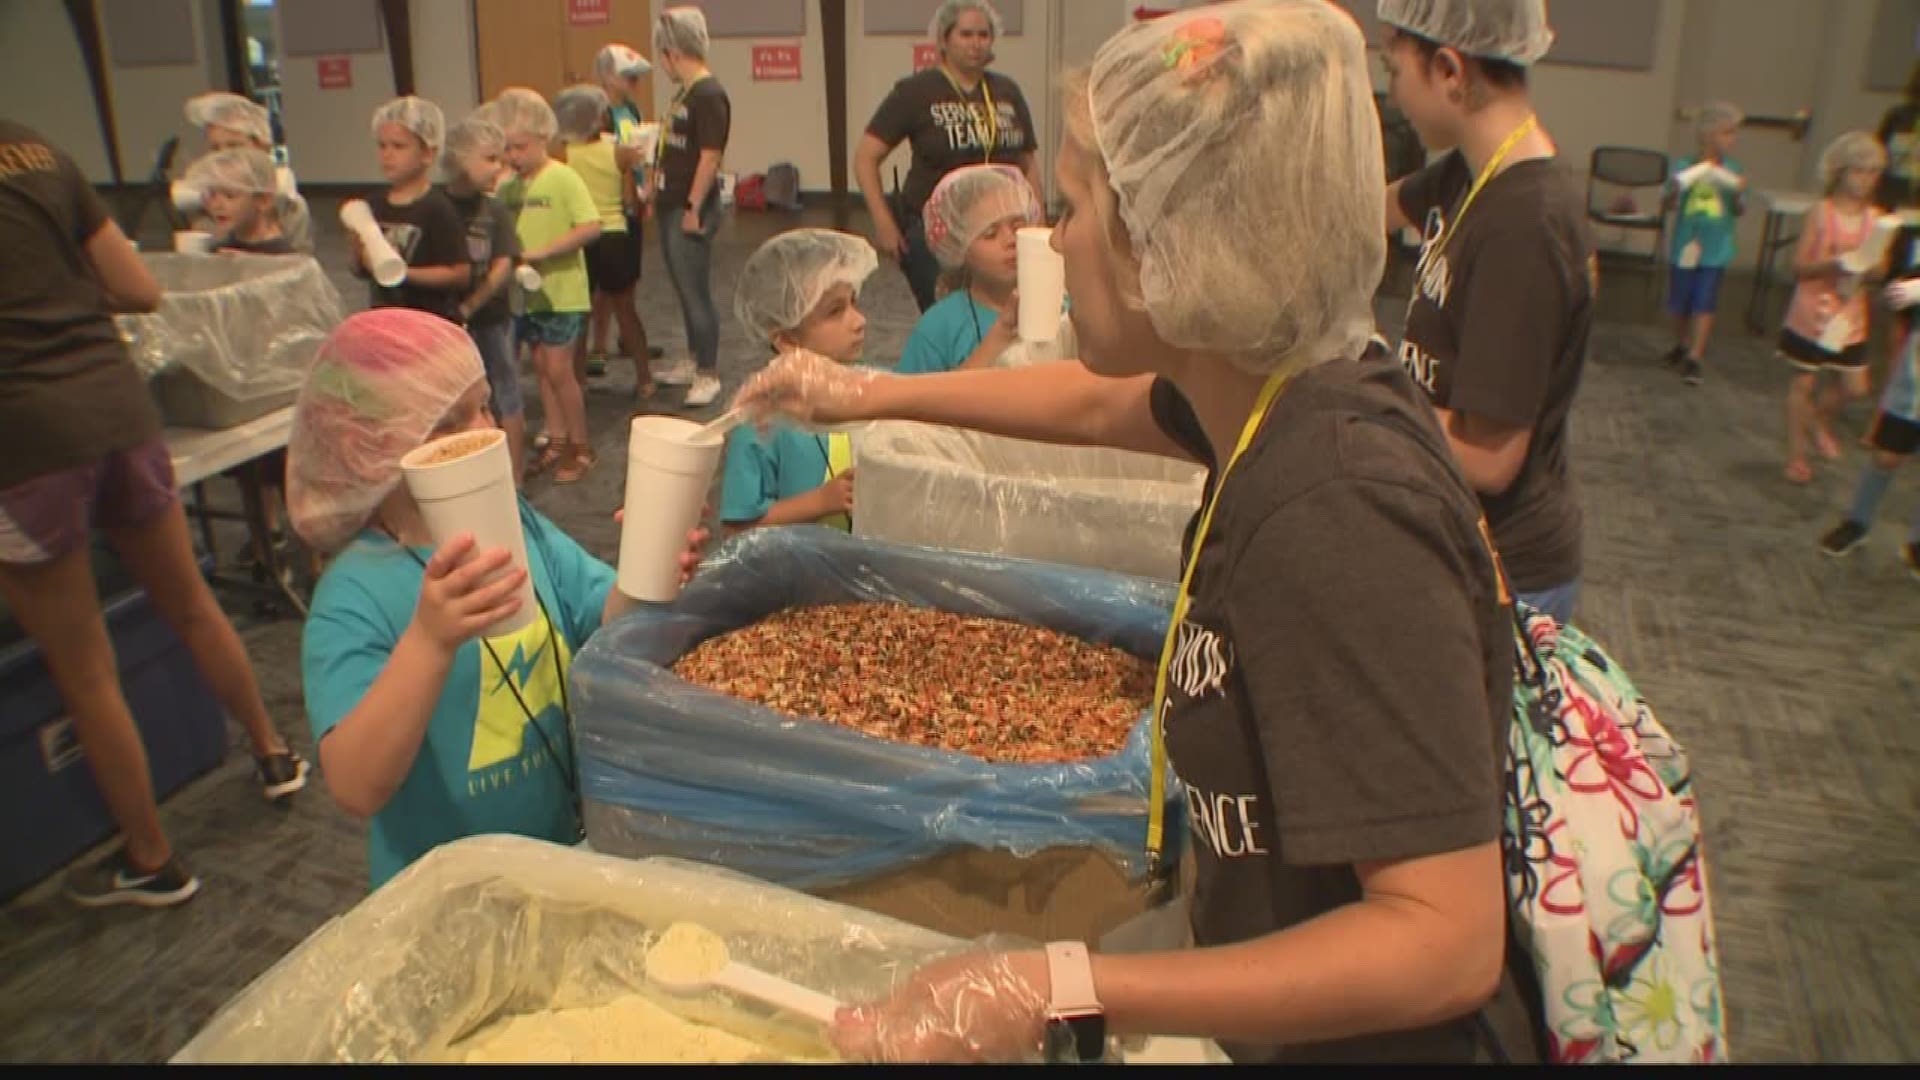 They spent the day packing food for "Kids Against Hunger."